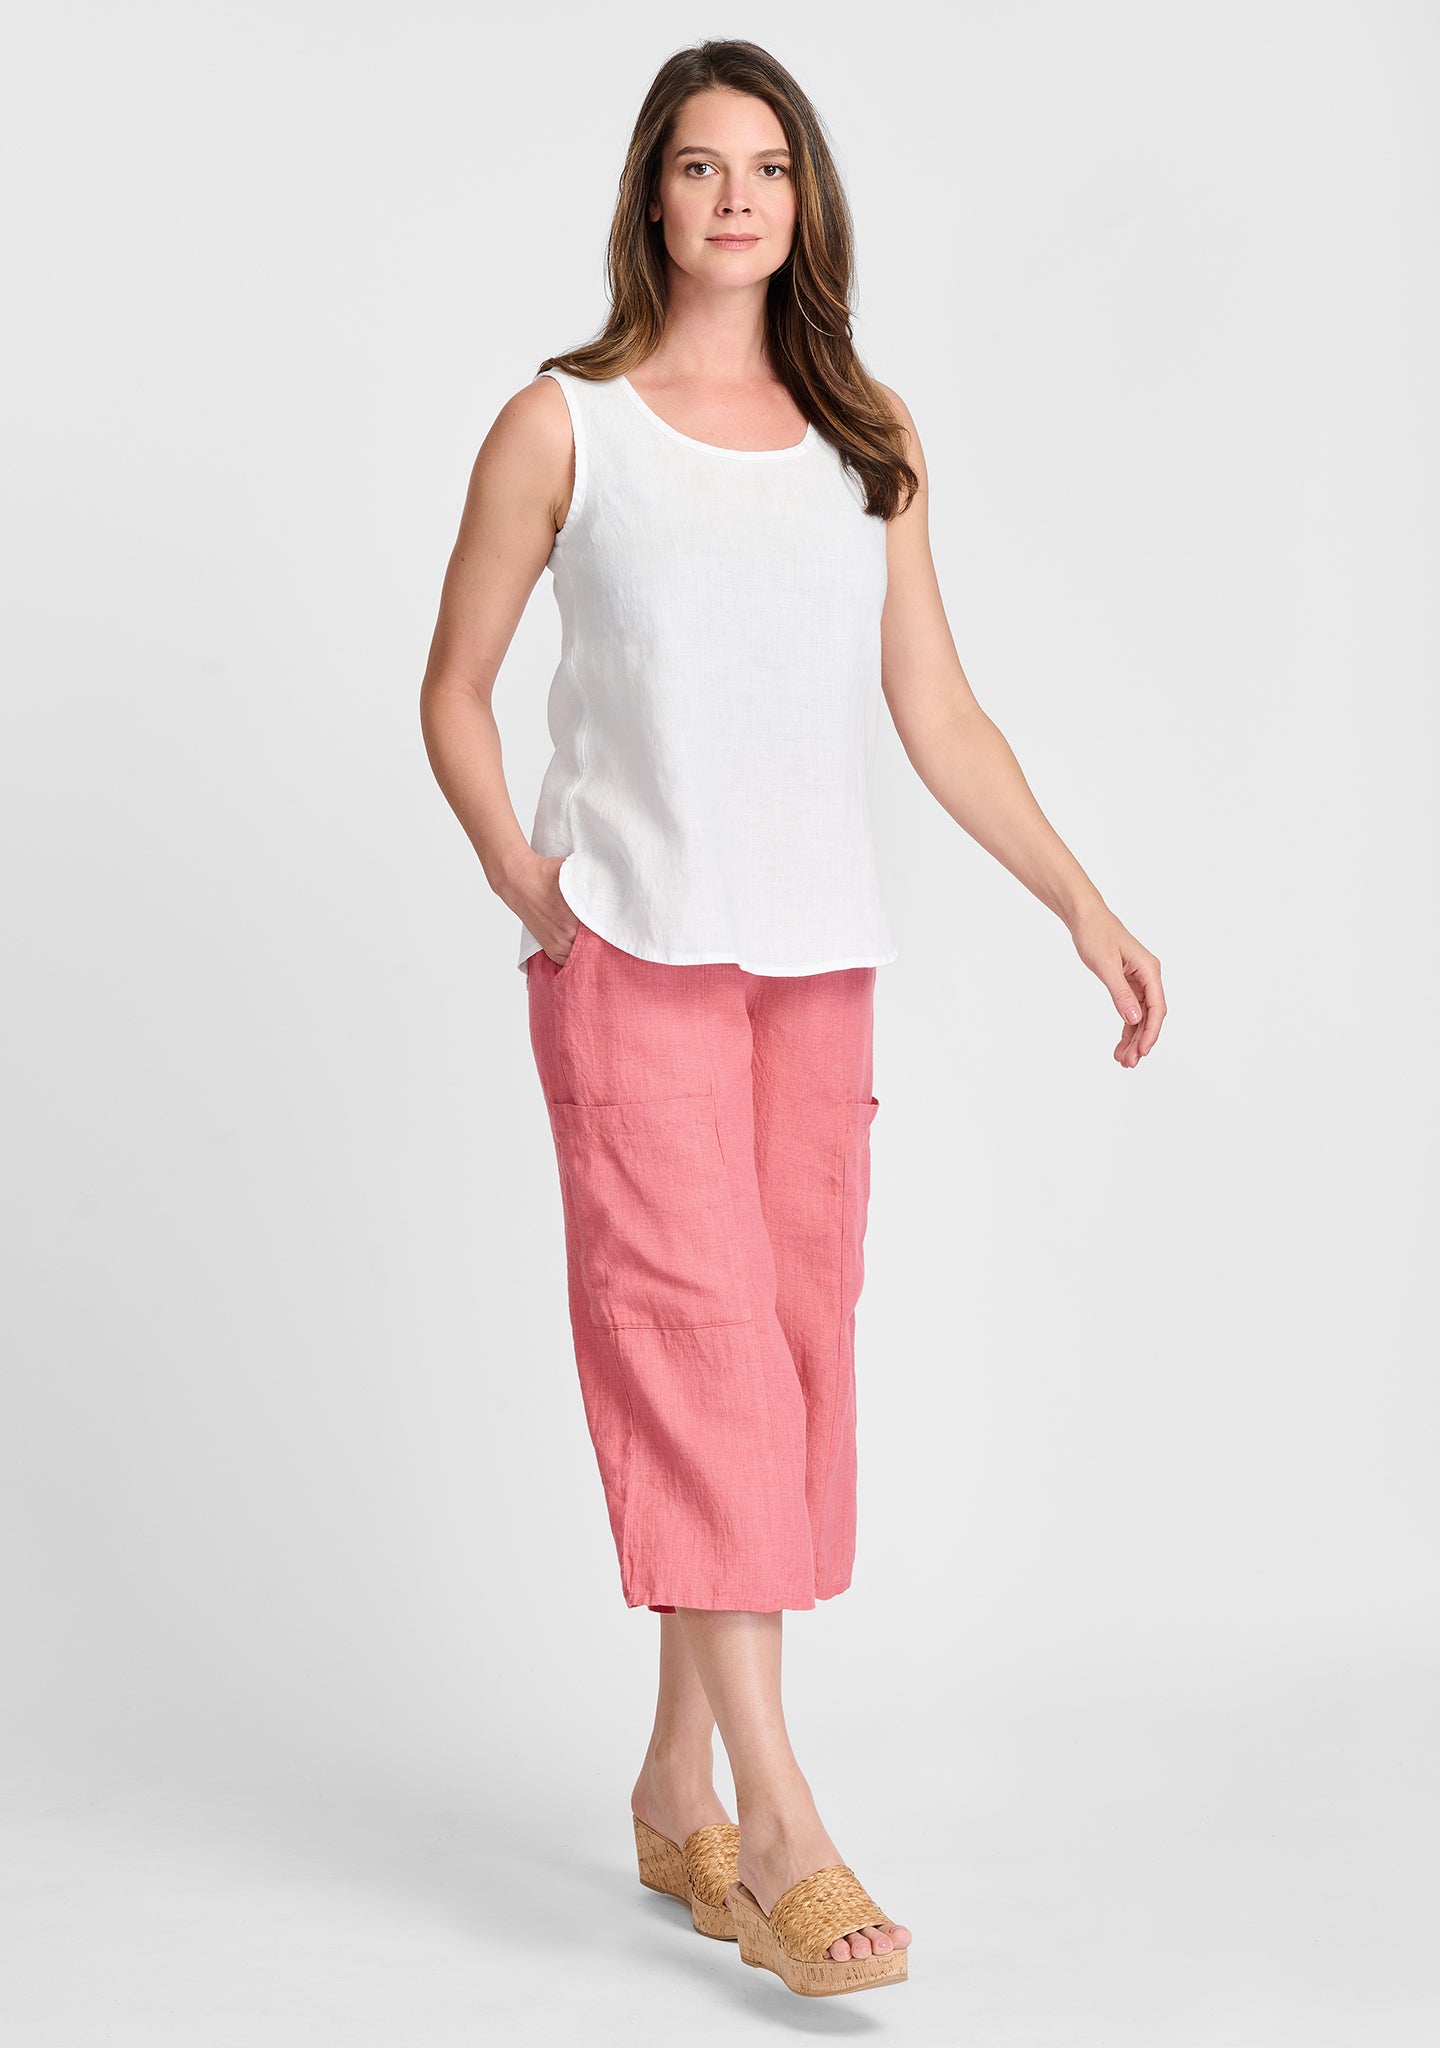 FLAX linen tank in white with linen pants in orange